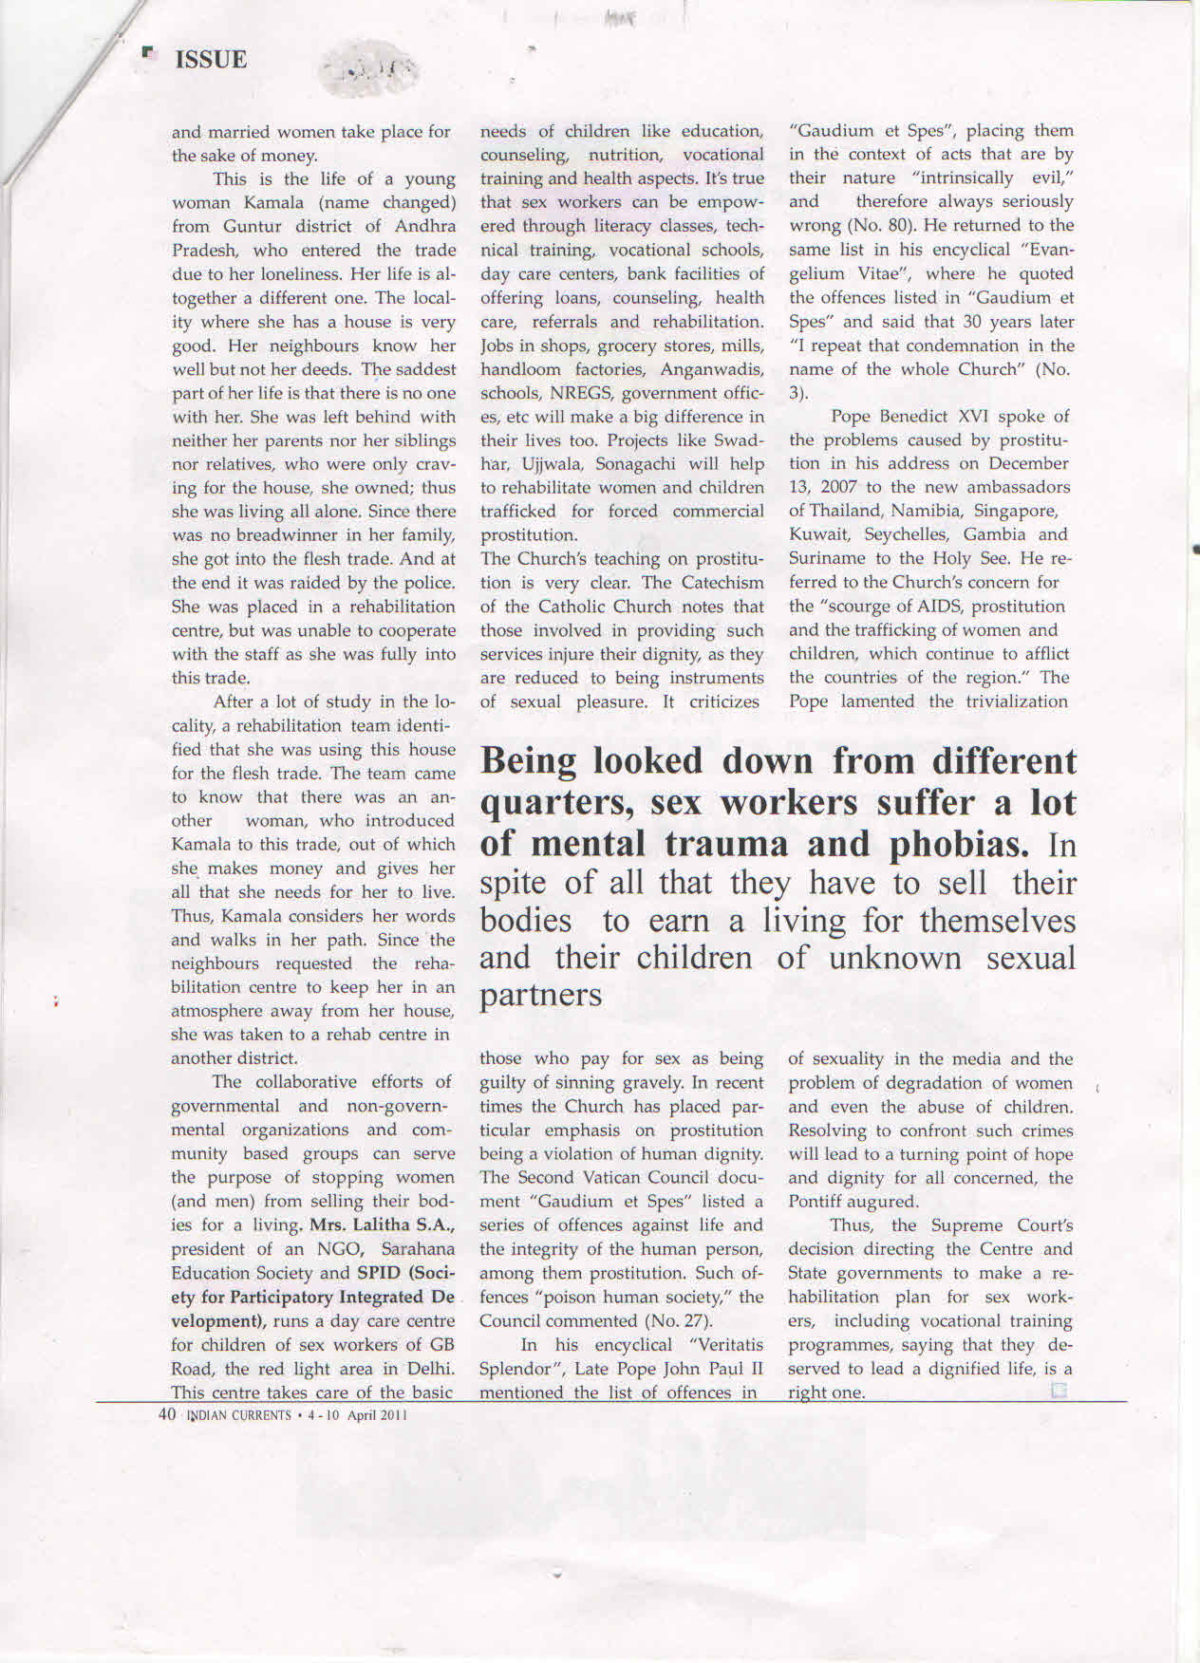 INDIA CURRENTS - DELHI  Life for Sex Workers - Page 3  04-10-April-2010